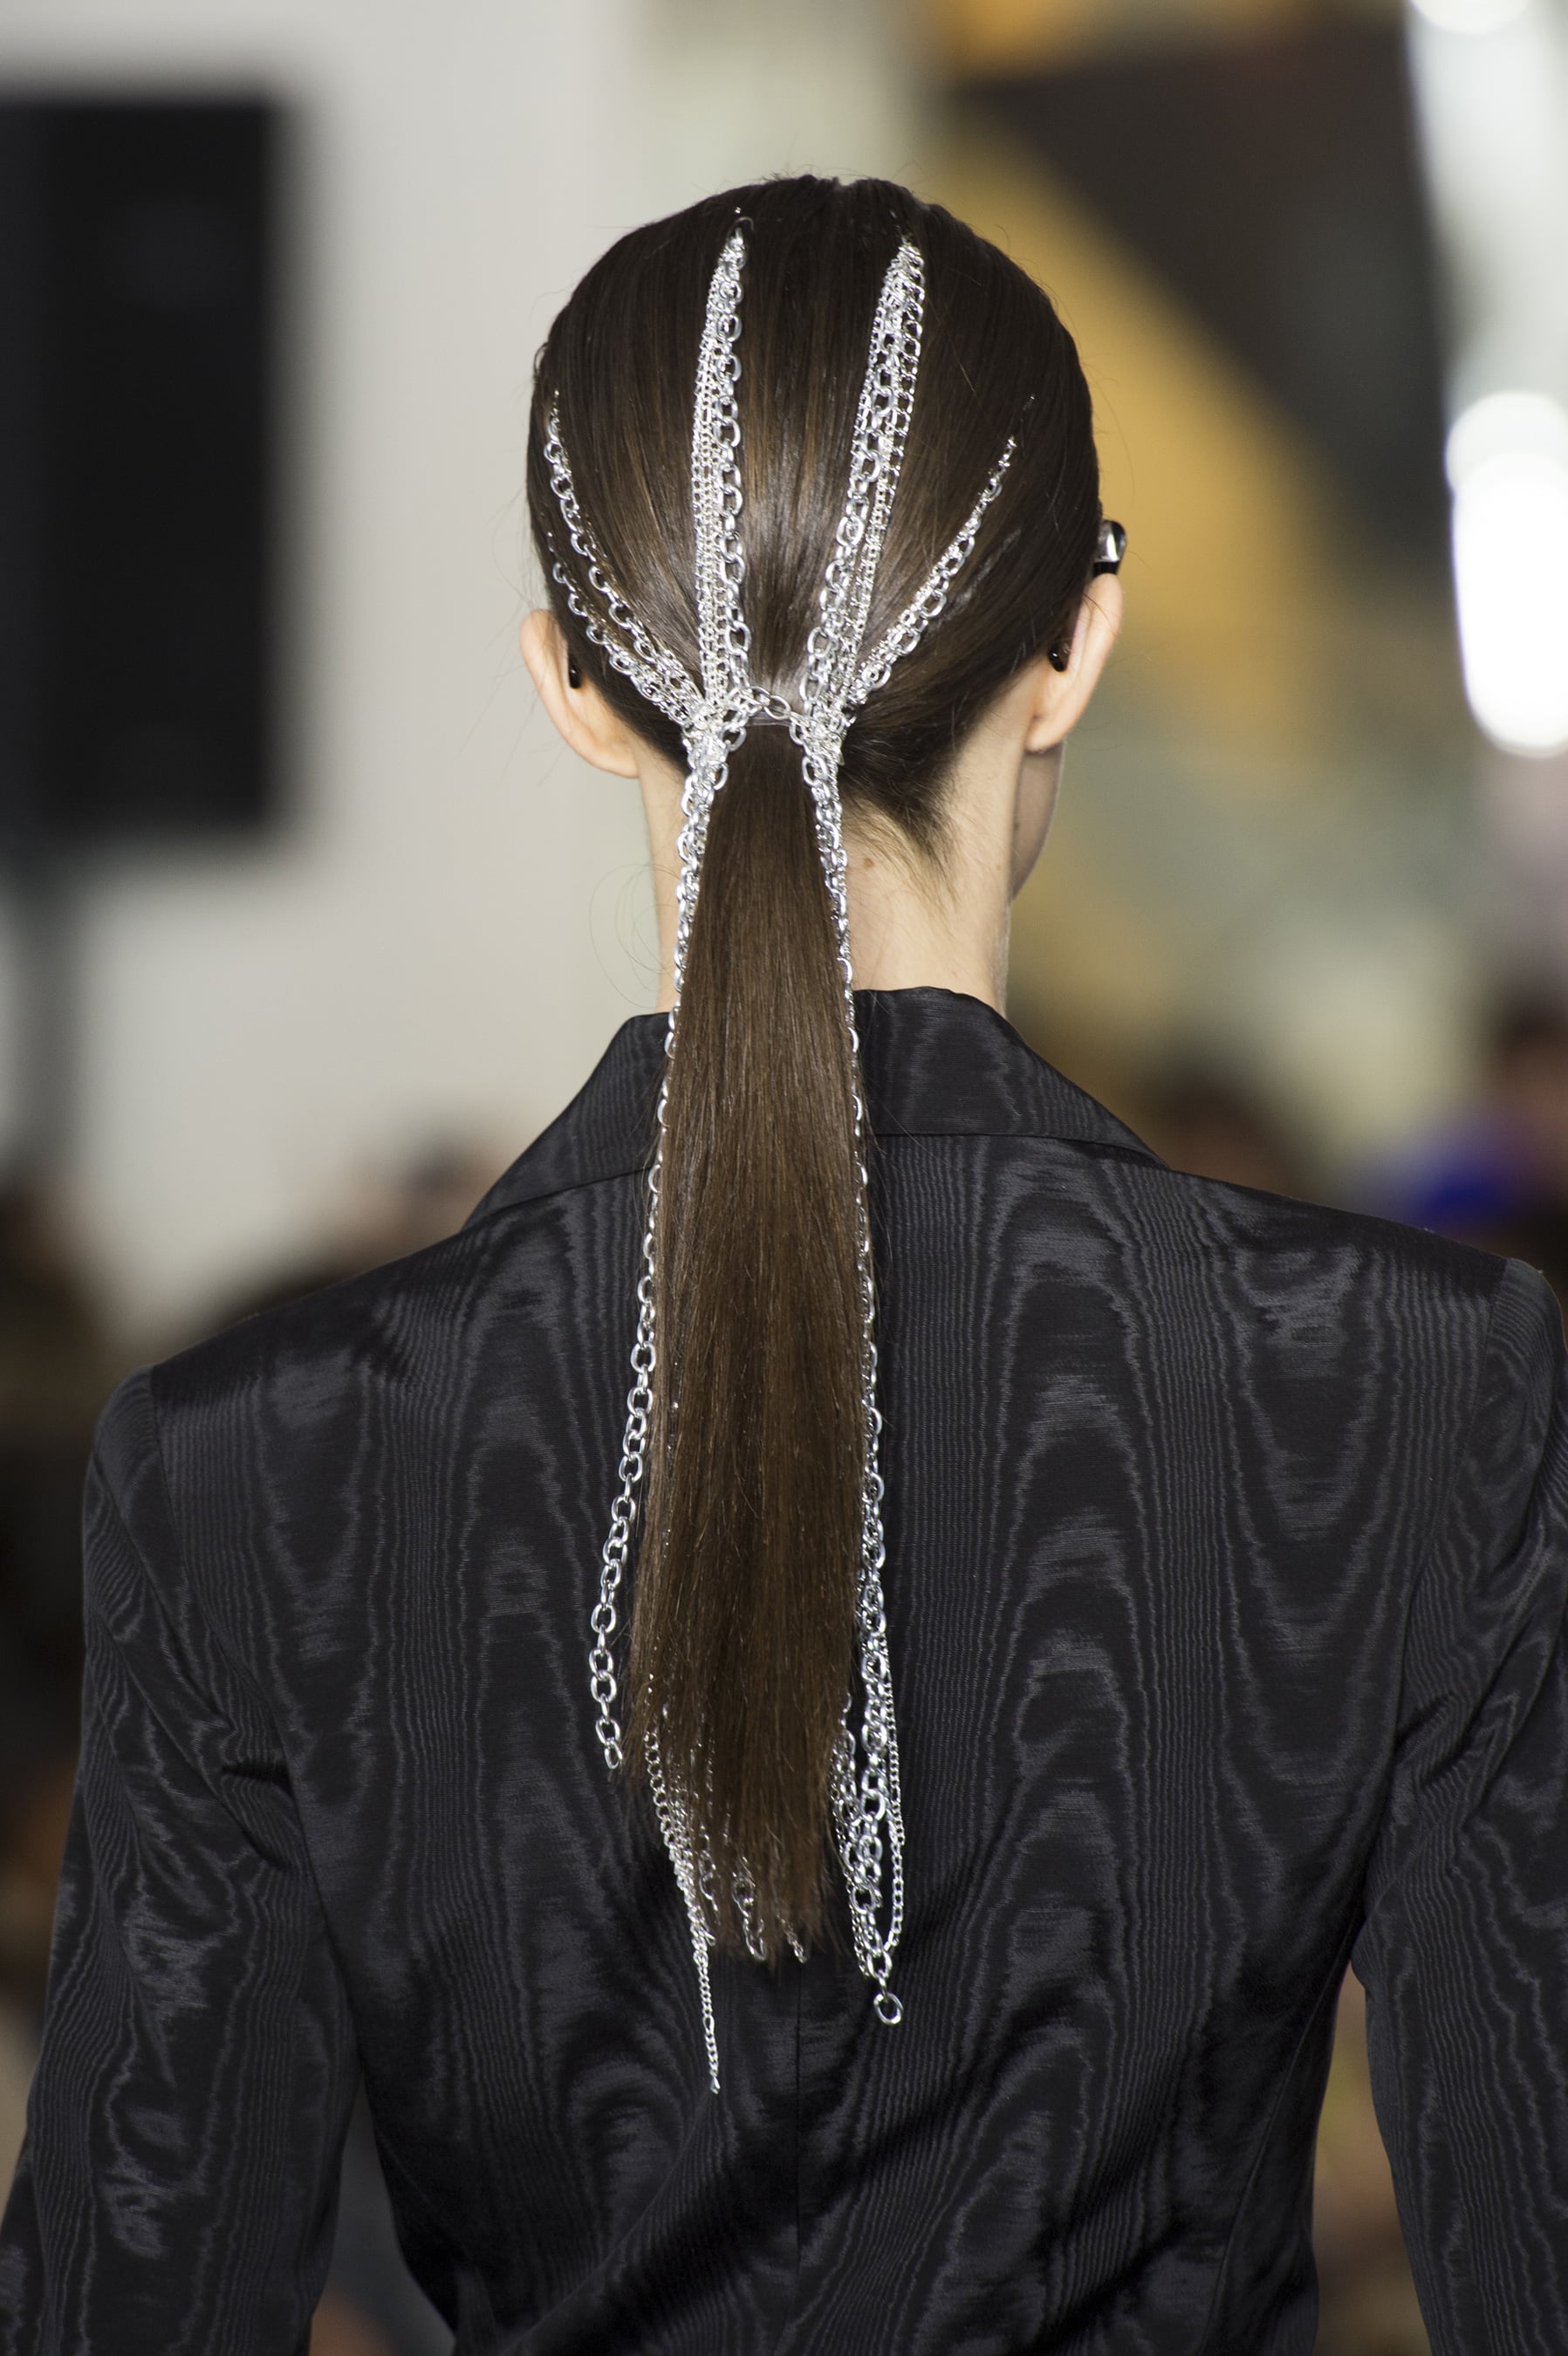 Designer Hair Accessories To Buy Now